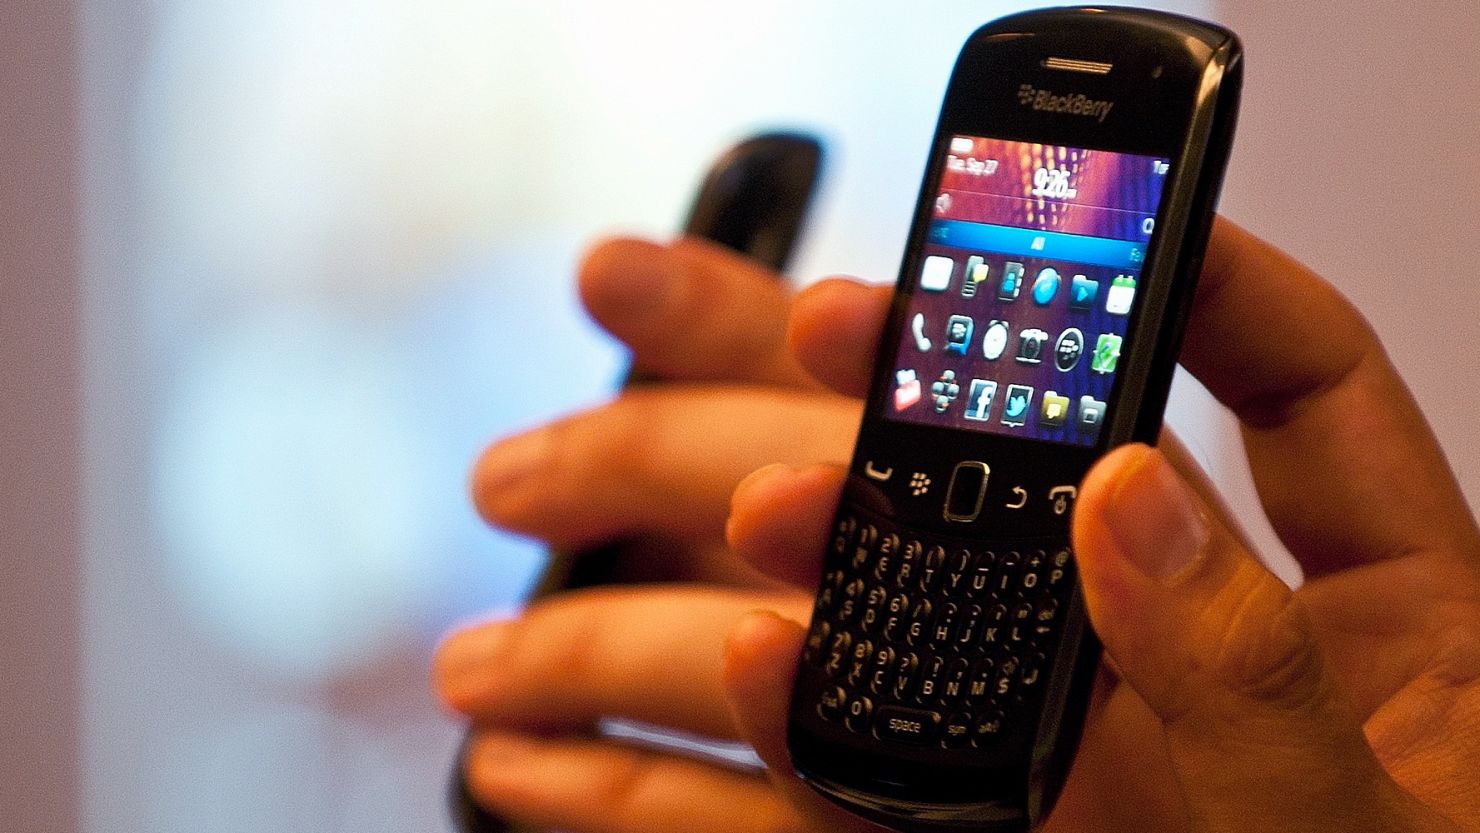 BlackBerry customers today started complaining on Twitter of mail delays and inaccessibly on their BlackBerry devices.